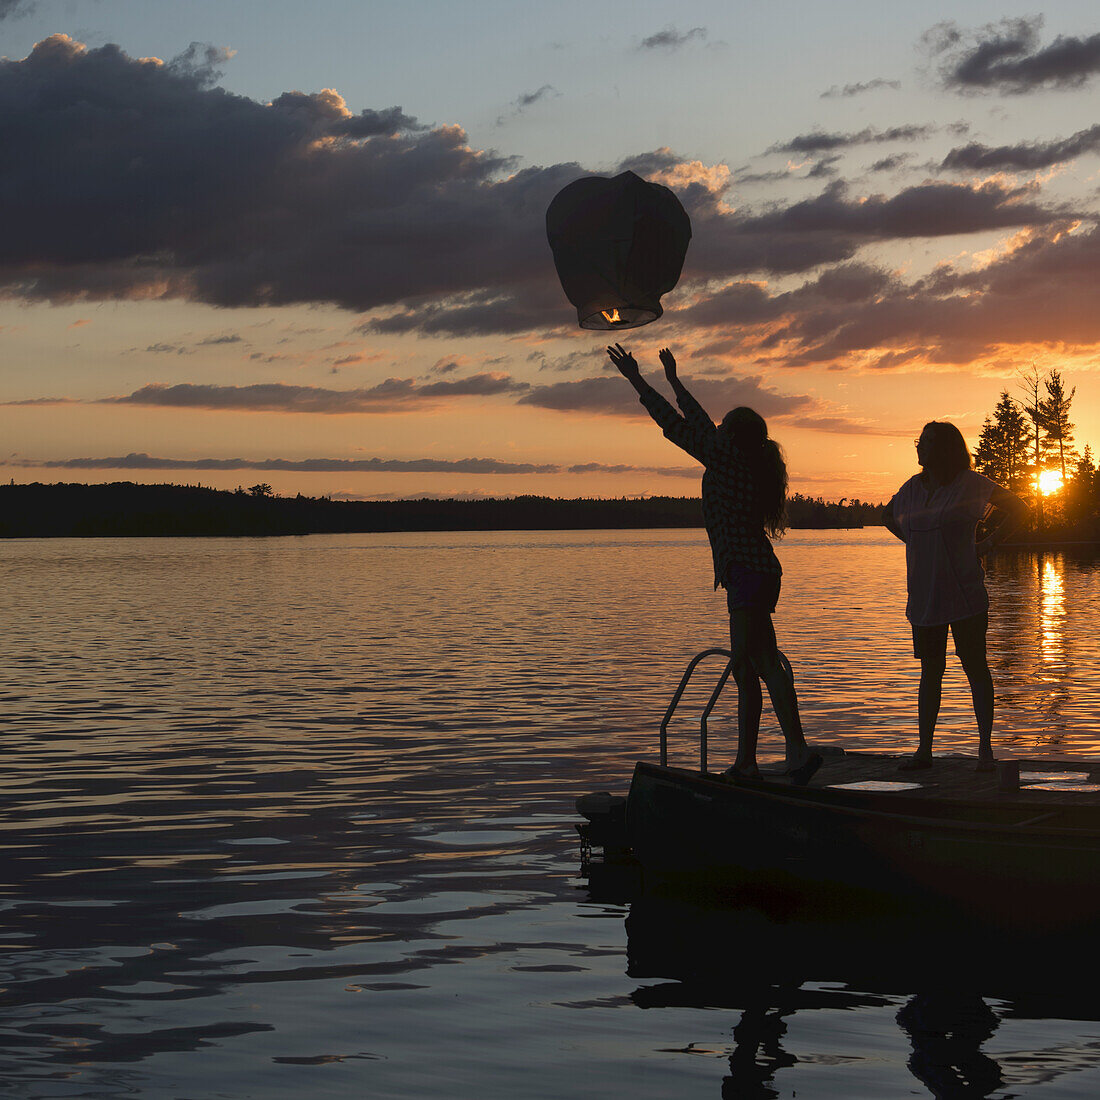 Silhouette Of A Teenage Girl Releasing A Lit Lantern Out Over A Lake At Sunset; Lake Of The Woods, Ontario, Canada